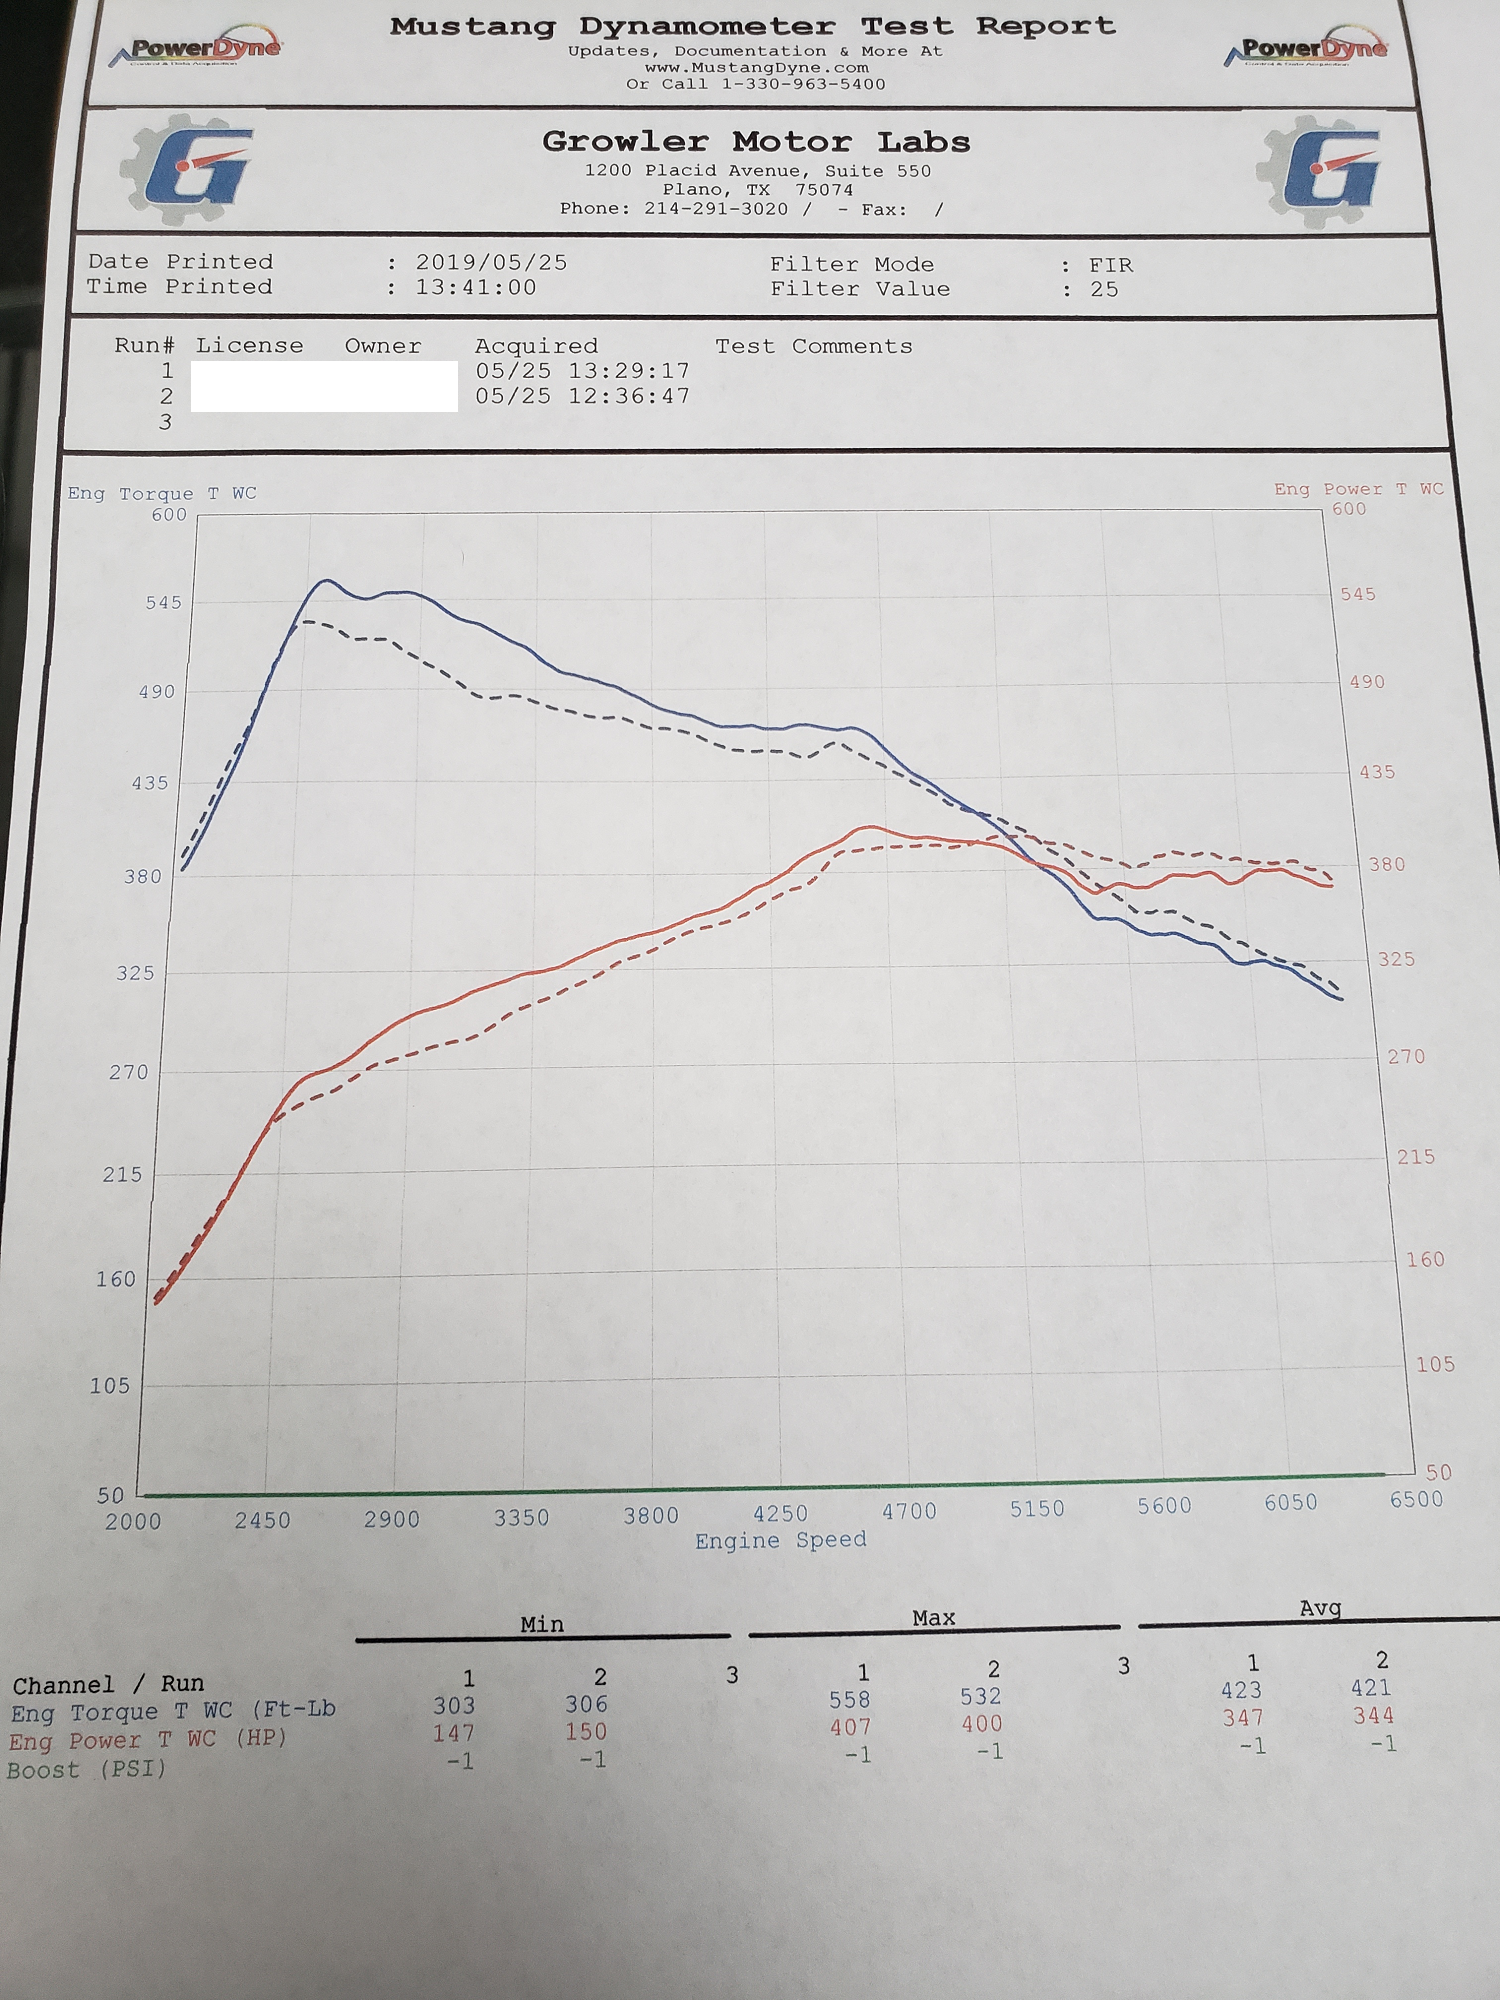 New Fastest Macan Record? Dyno Results In!